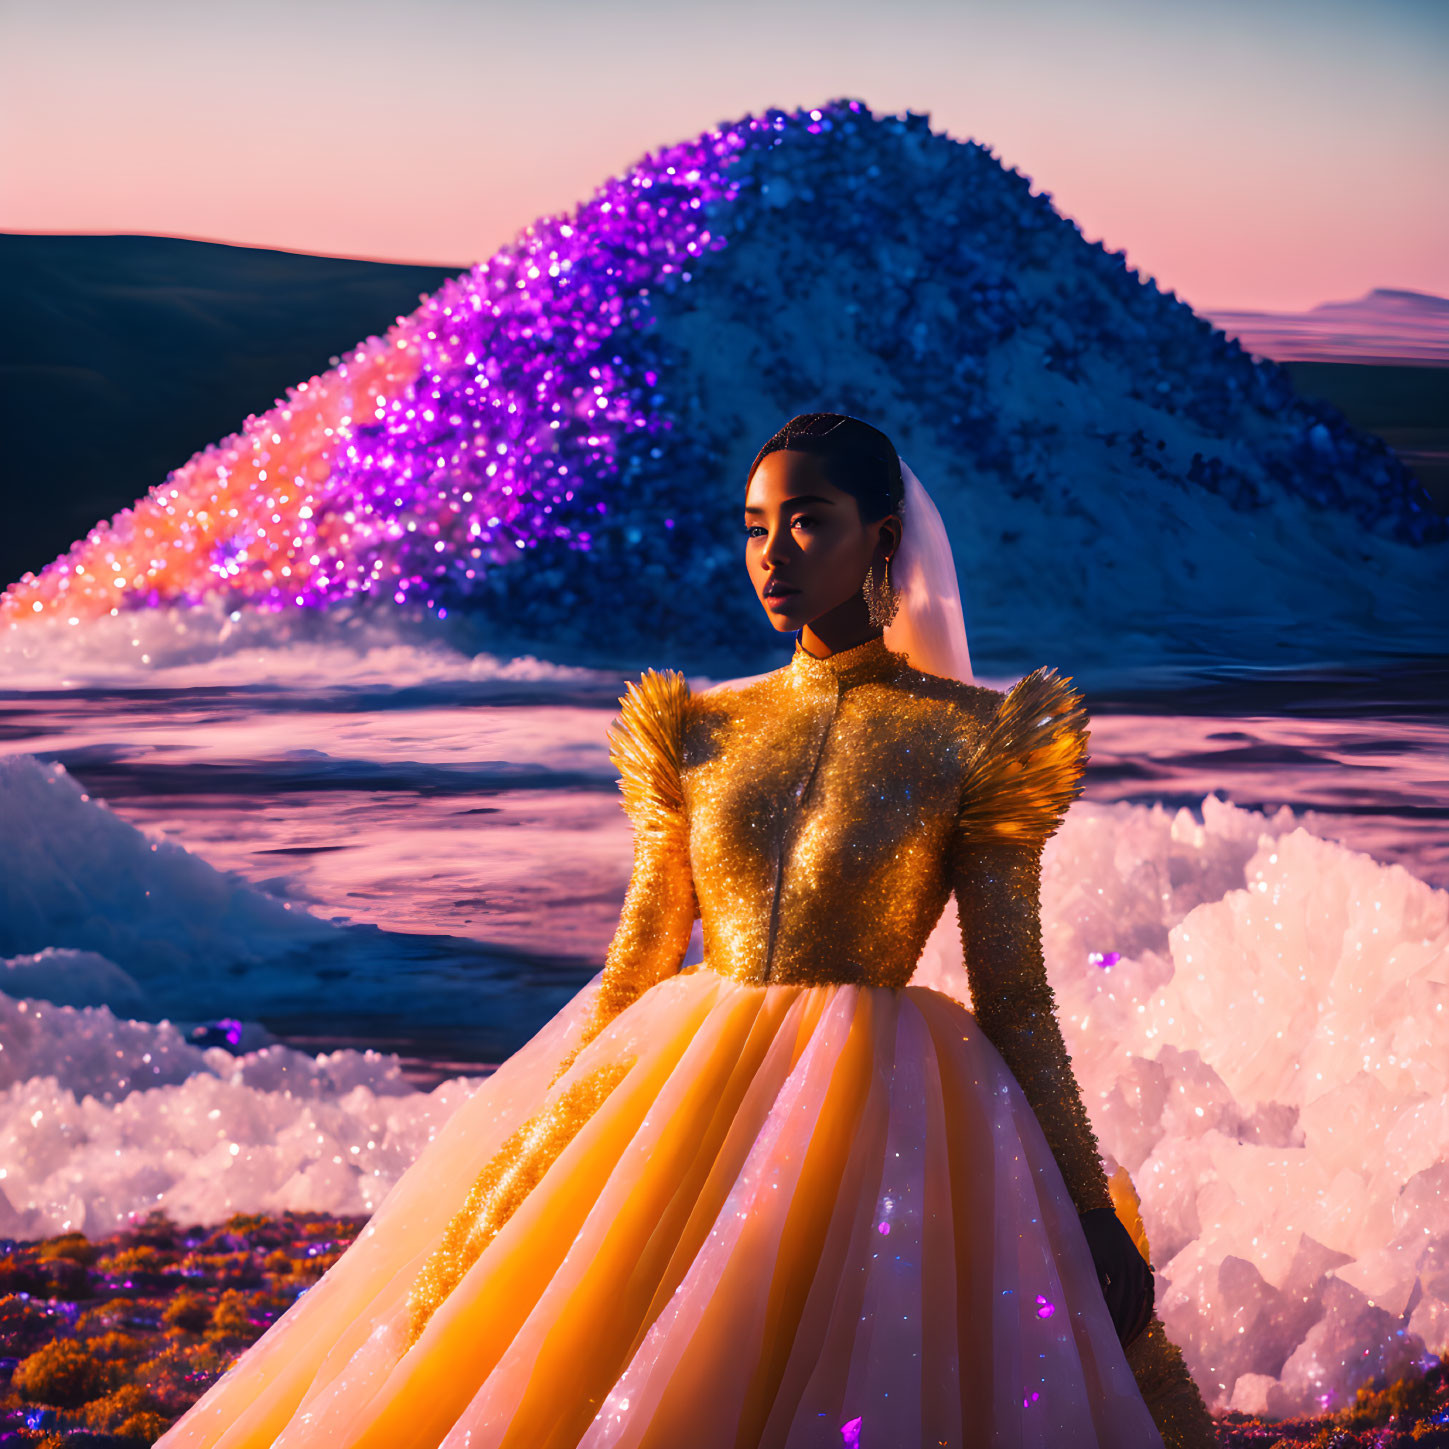 Woman in Sparkling Gold Gown Amid Crystal Backdrop at Sunset